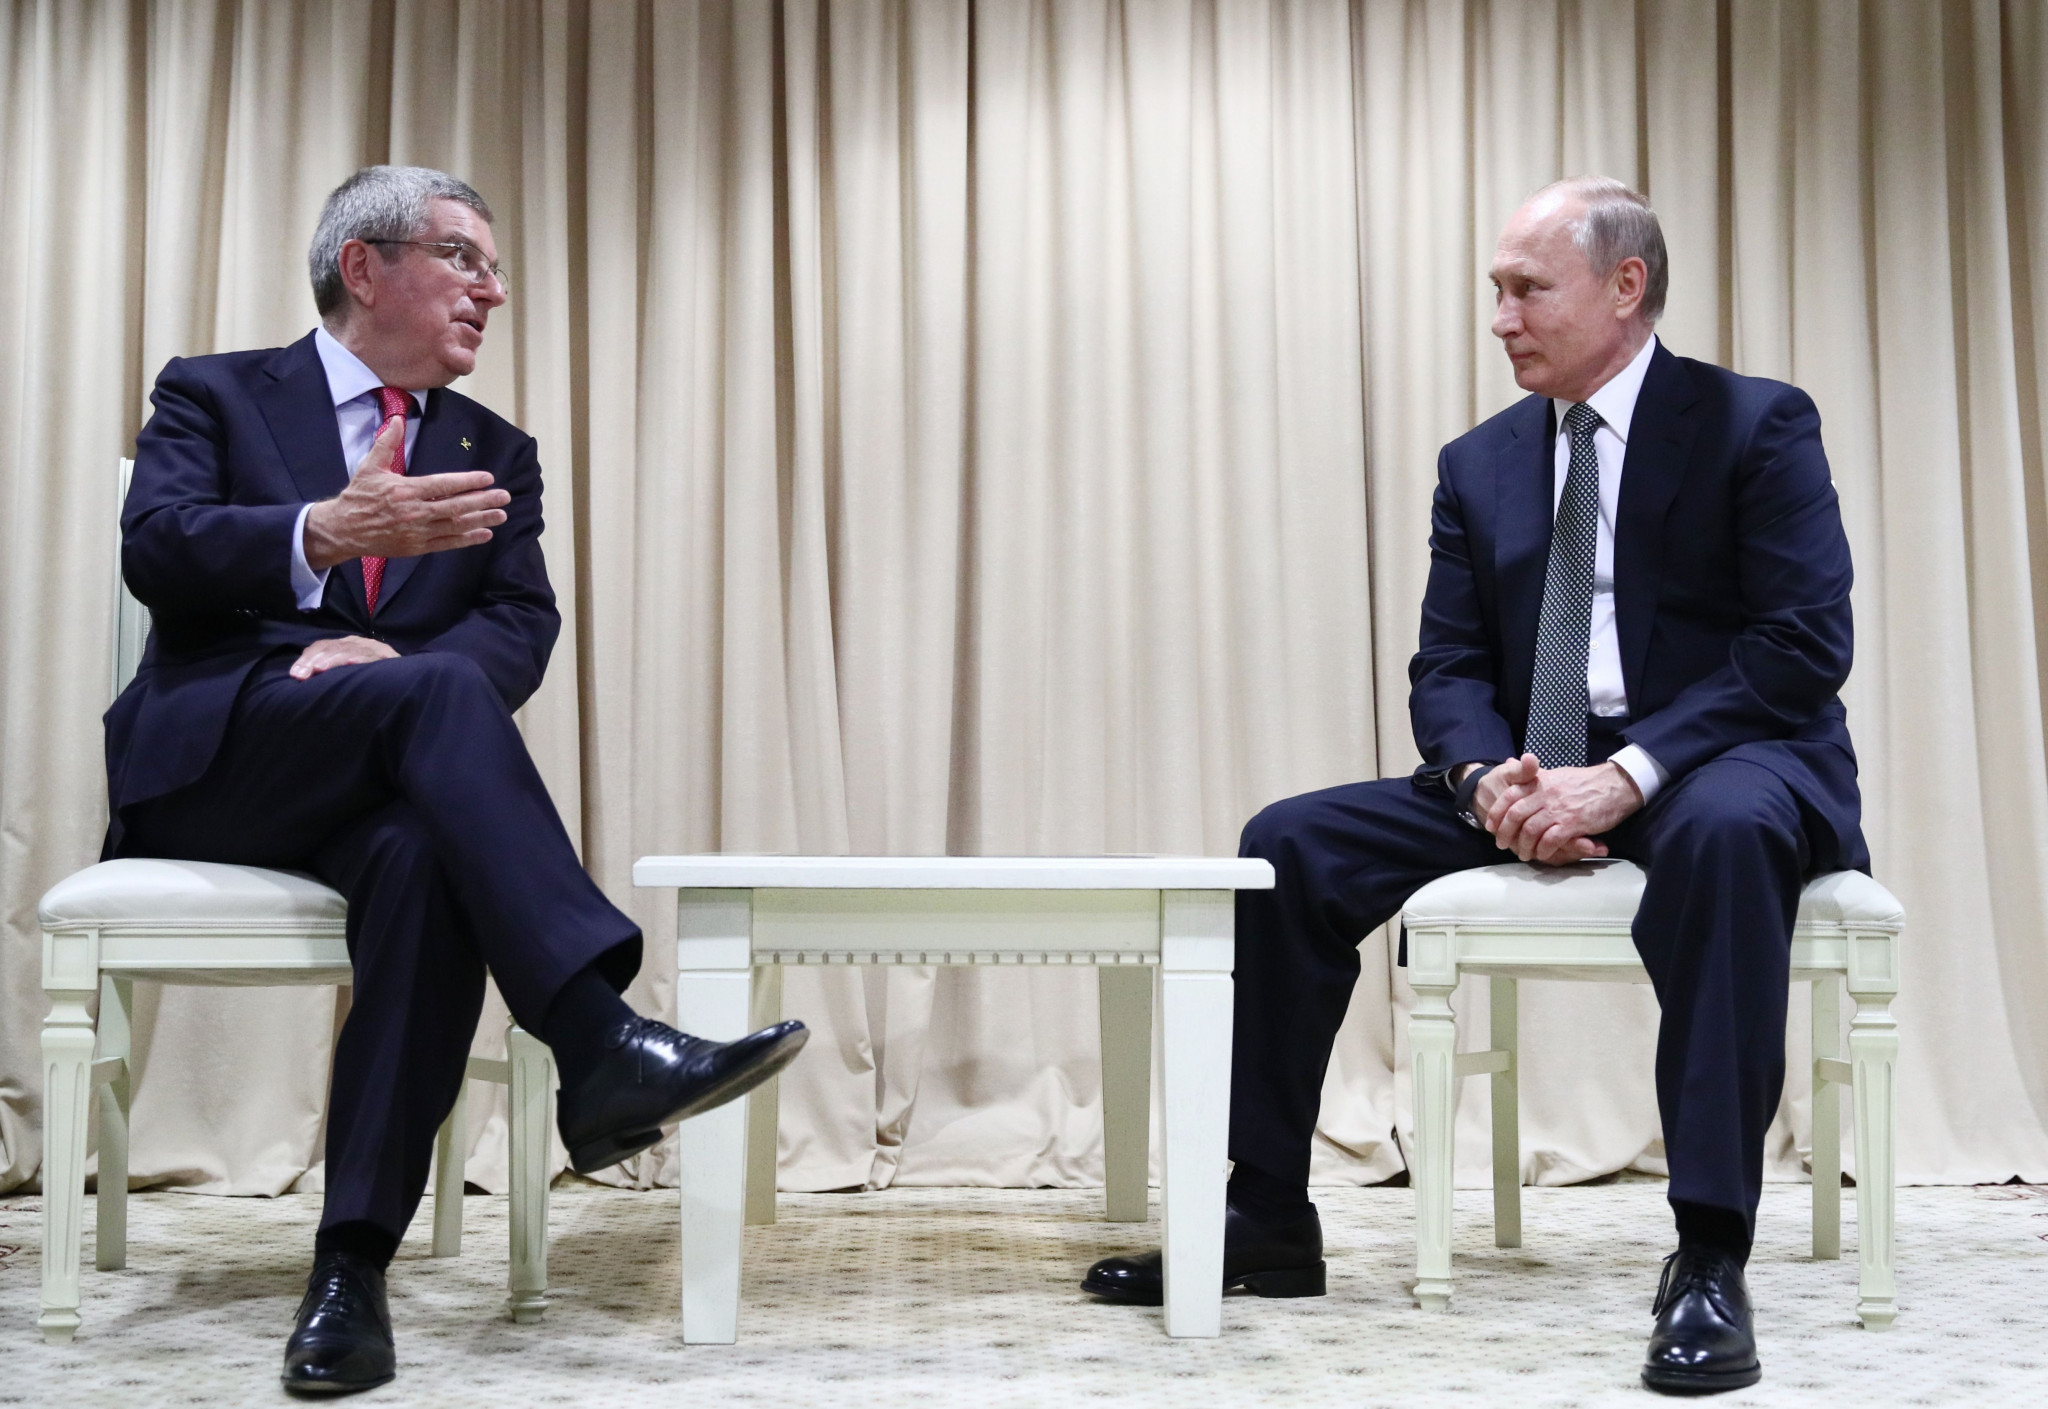 Putin congratulates Belarus for successful organisation of European Games during meeting with Bach